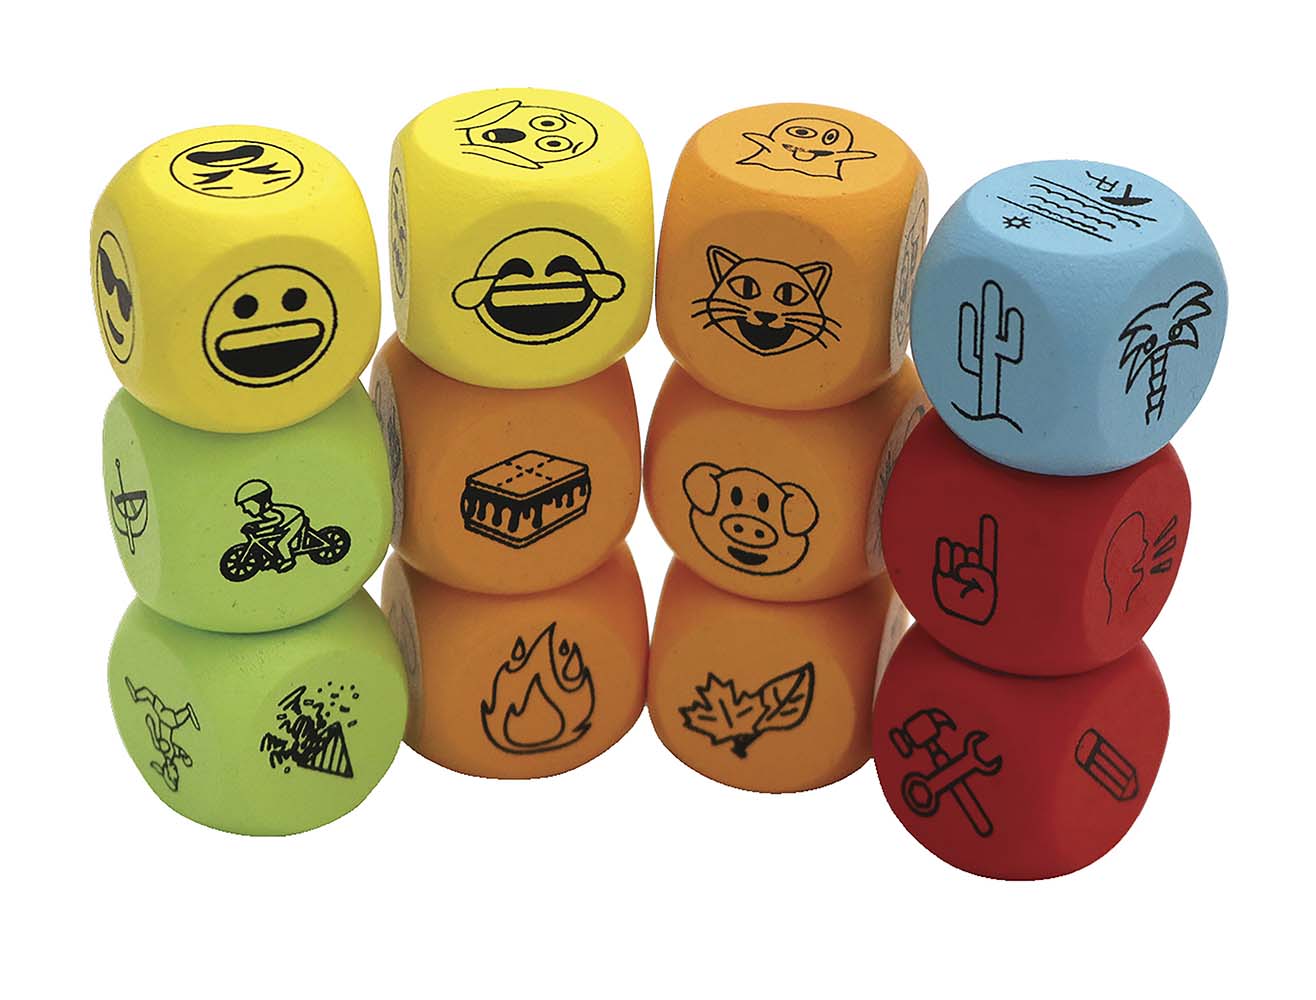 7692174 A set of story dice. Roll the dice and tell a story about what you see. Contains 12 different dice. Cosy companion game for the whole family.